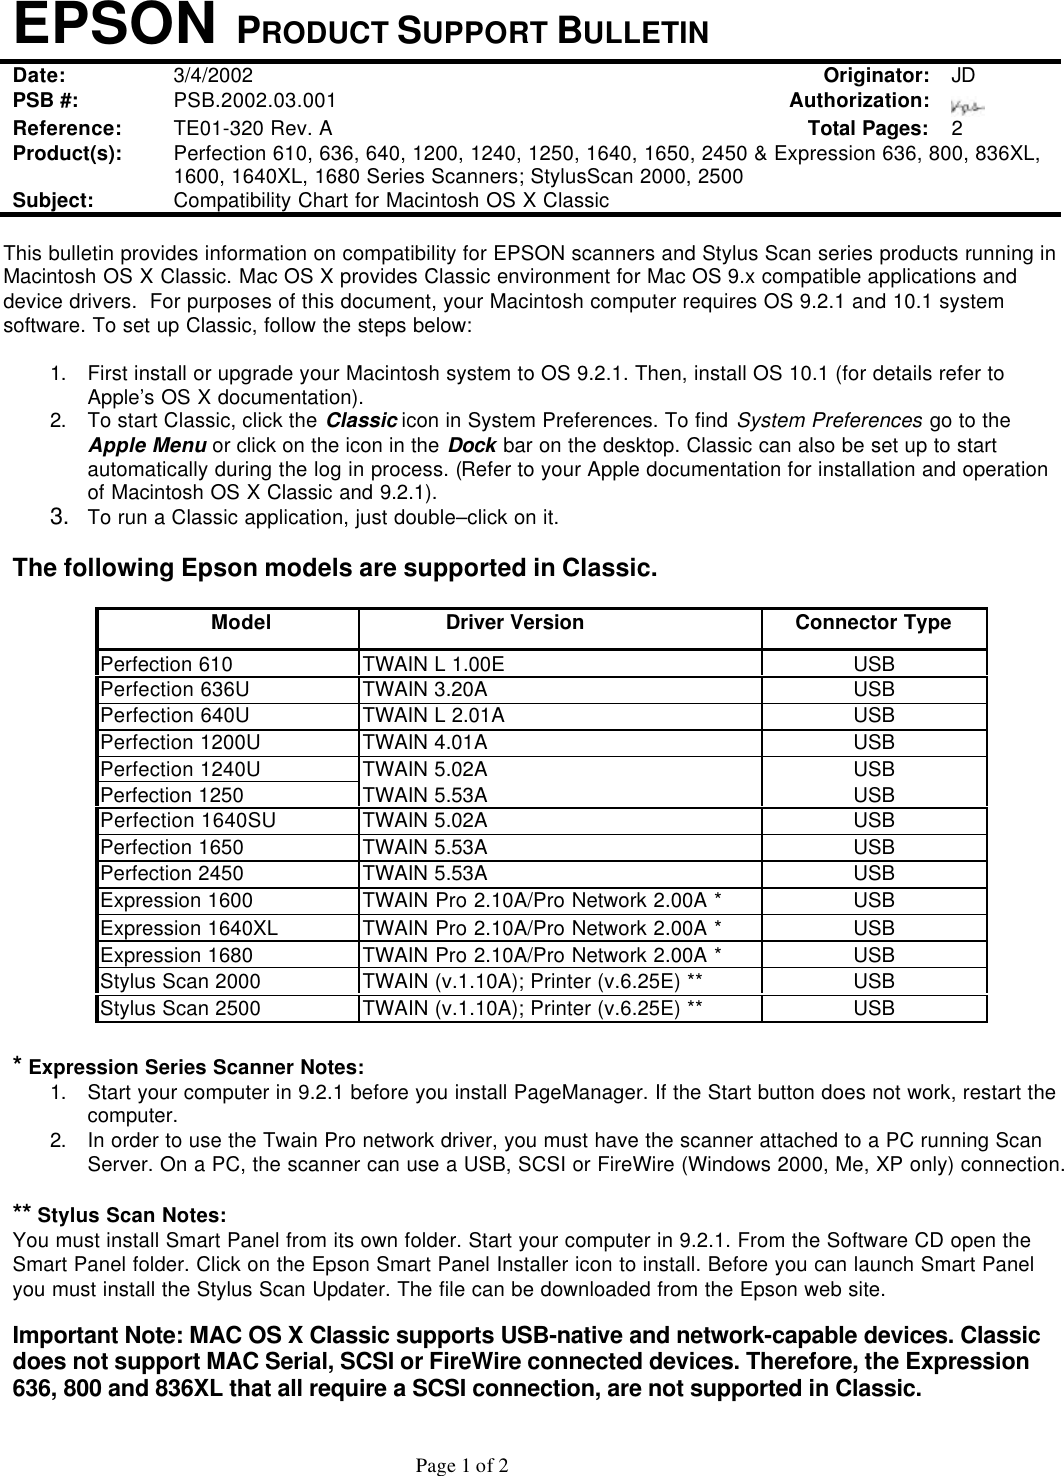 Page 3 of 7 - Epson Epson-Psb-2003-04-003-Users-Manual- Perfection 636U - Product Support Bulletin  Epson-psb-2003-04-003-users-manual